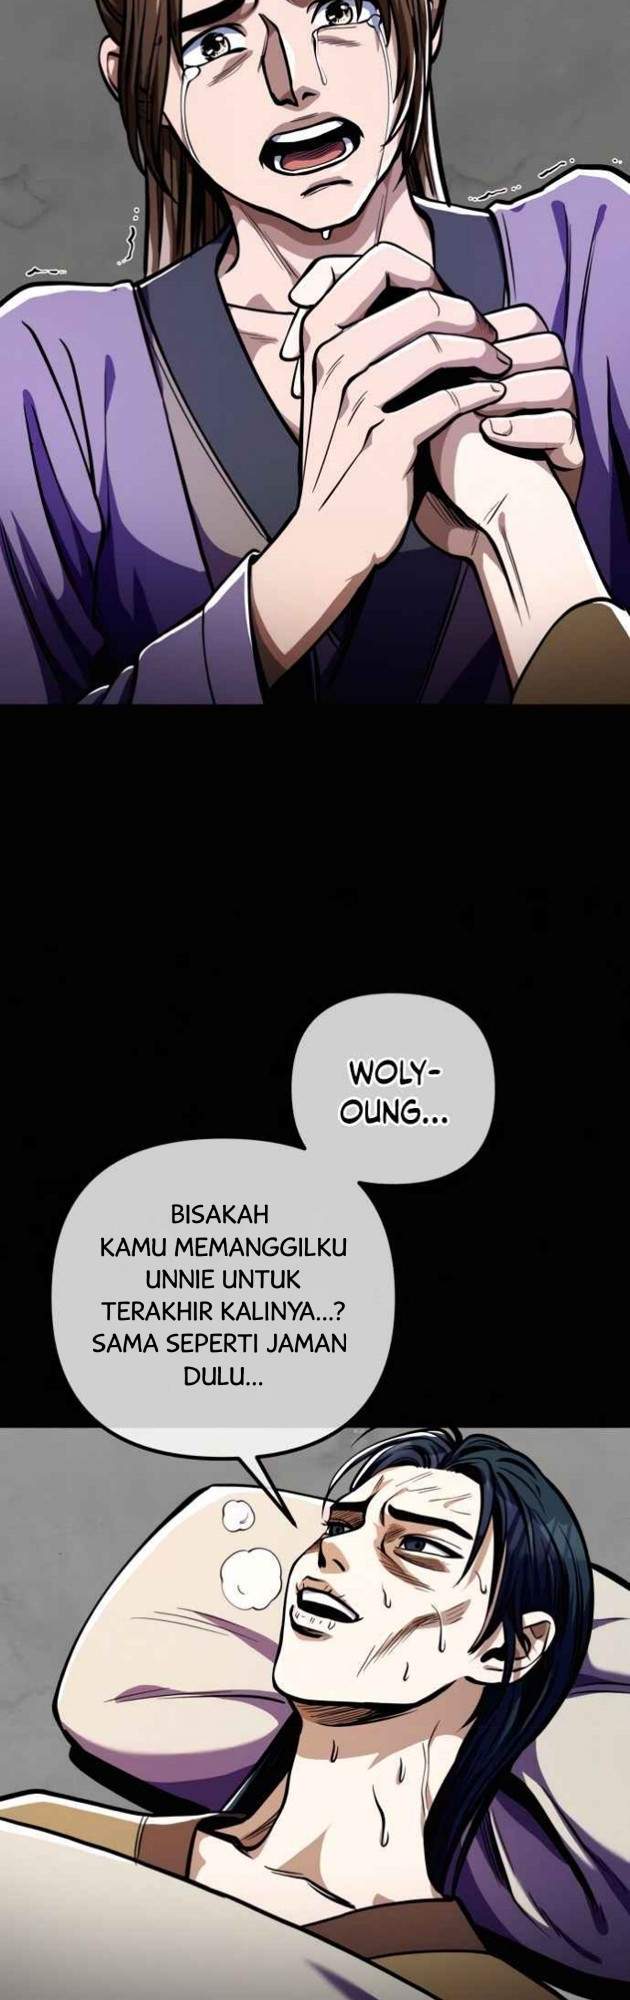 Ha Buk Paeng’s Youngest Son Chapter 7 28